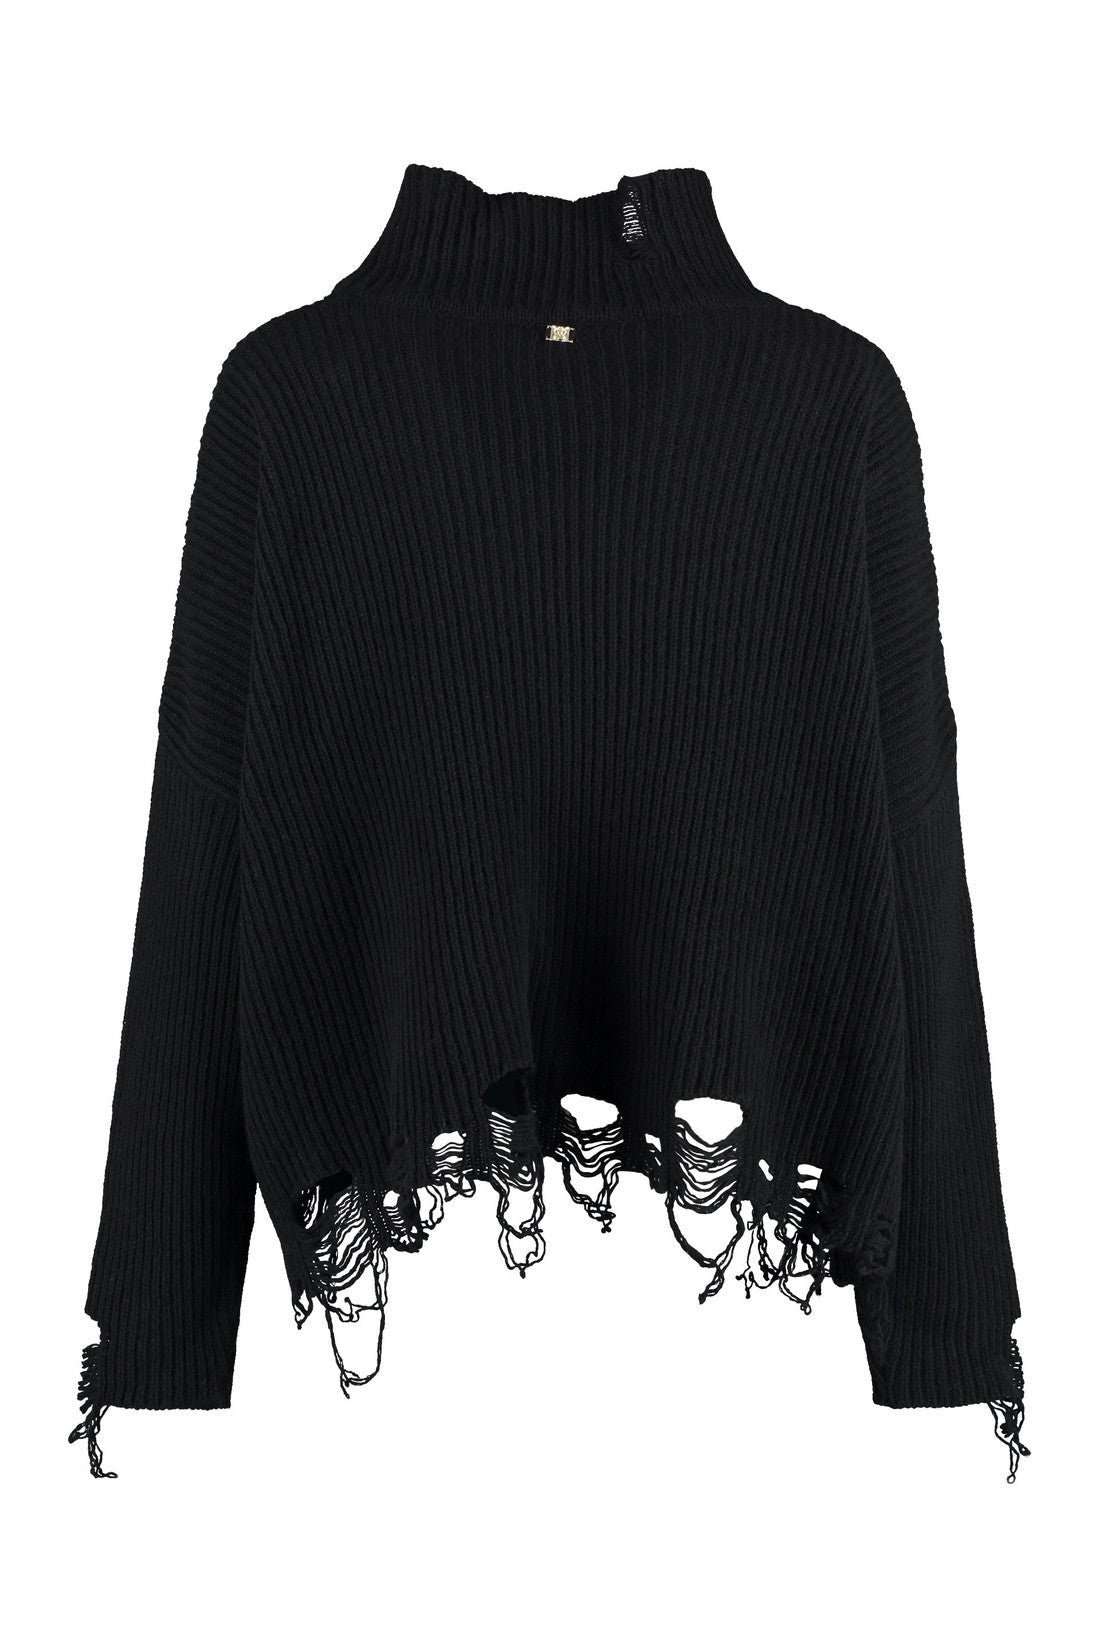 Pinko-OUTLET-SALE-Chitone turtleneck sweater-ARCHIVIST